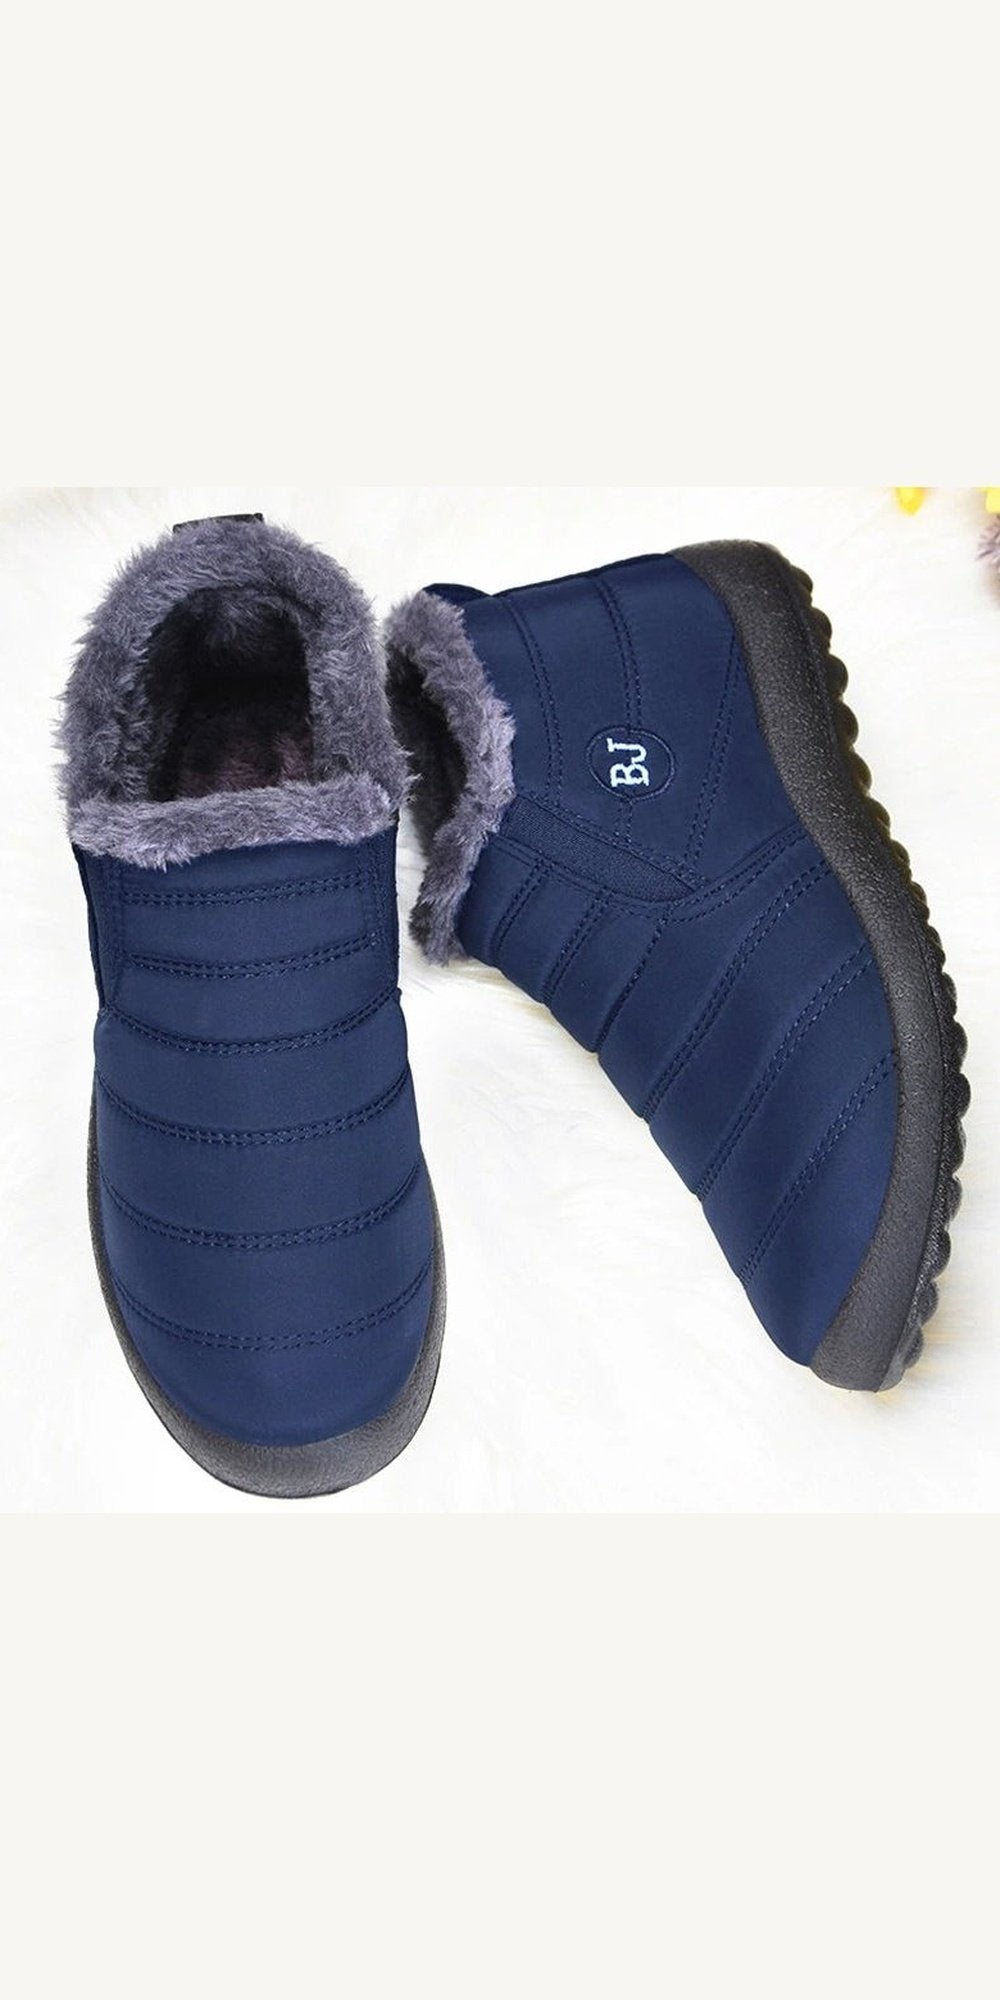 Women Boots Lightweight Winter Shoes for Women 2022 Ankle Boots Snow Botas Mujer Black Couple Waterproof Winter Boots plus Size